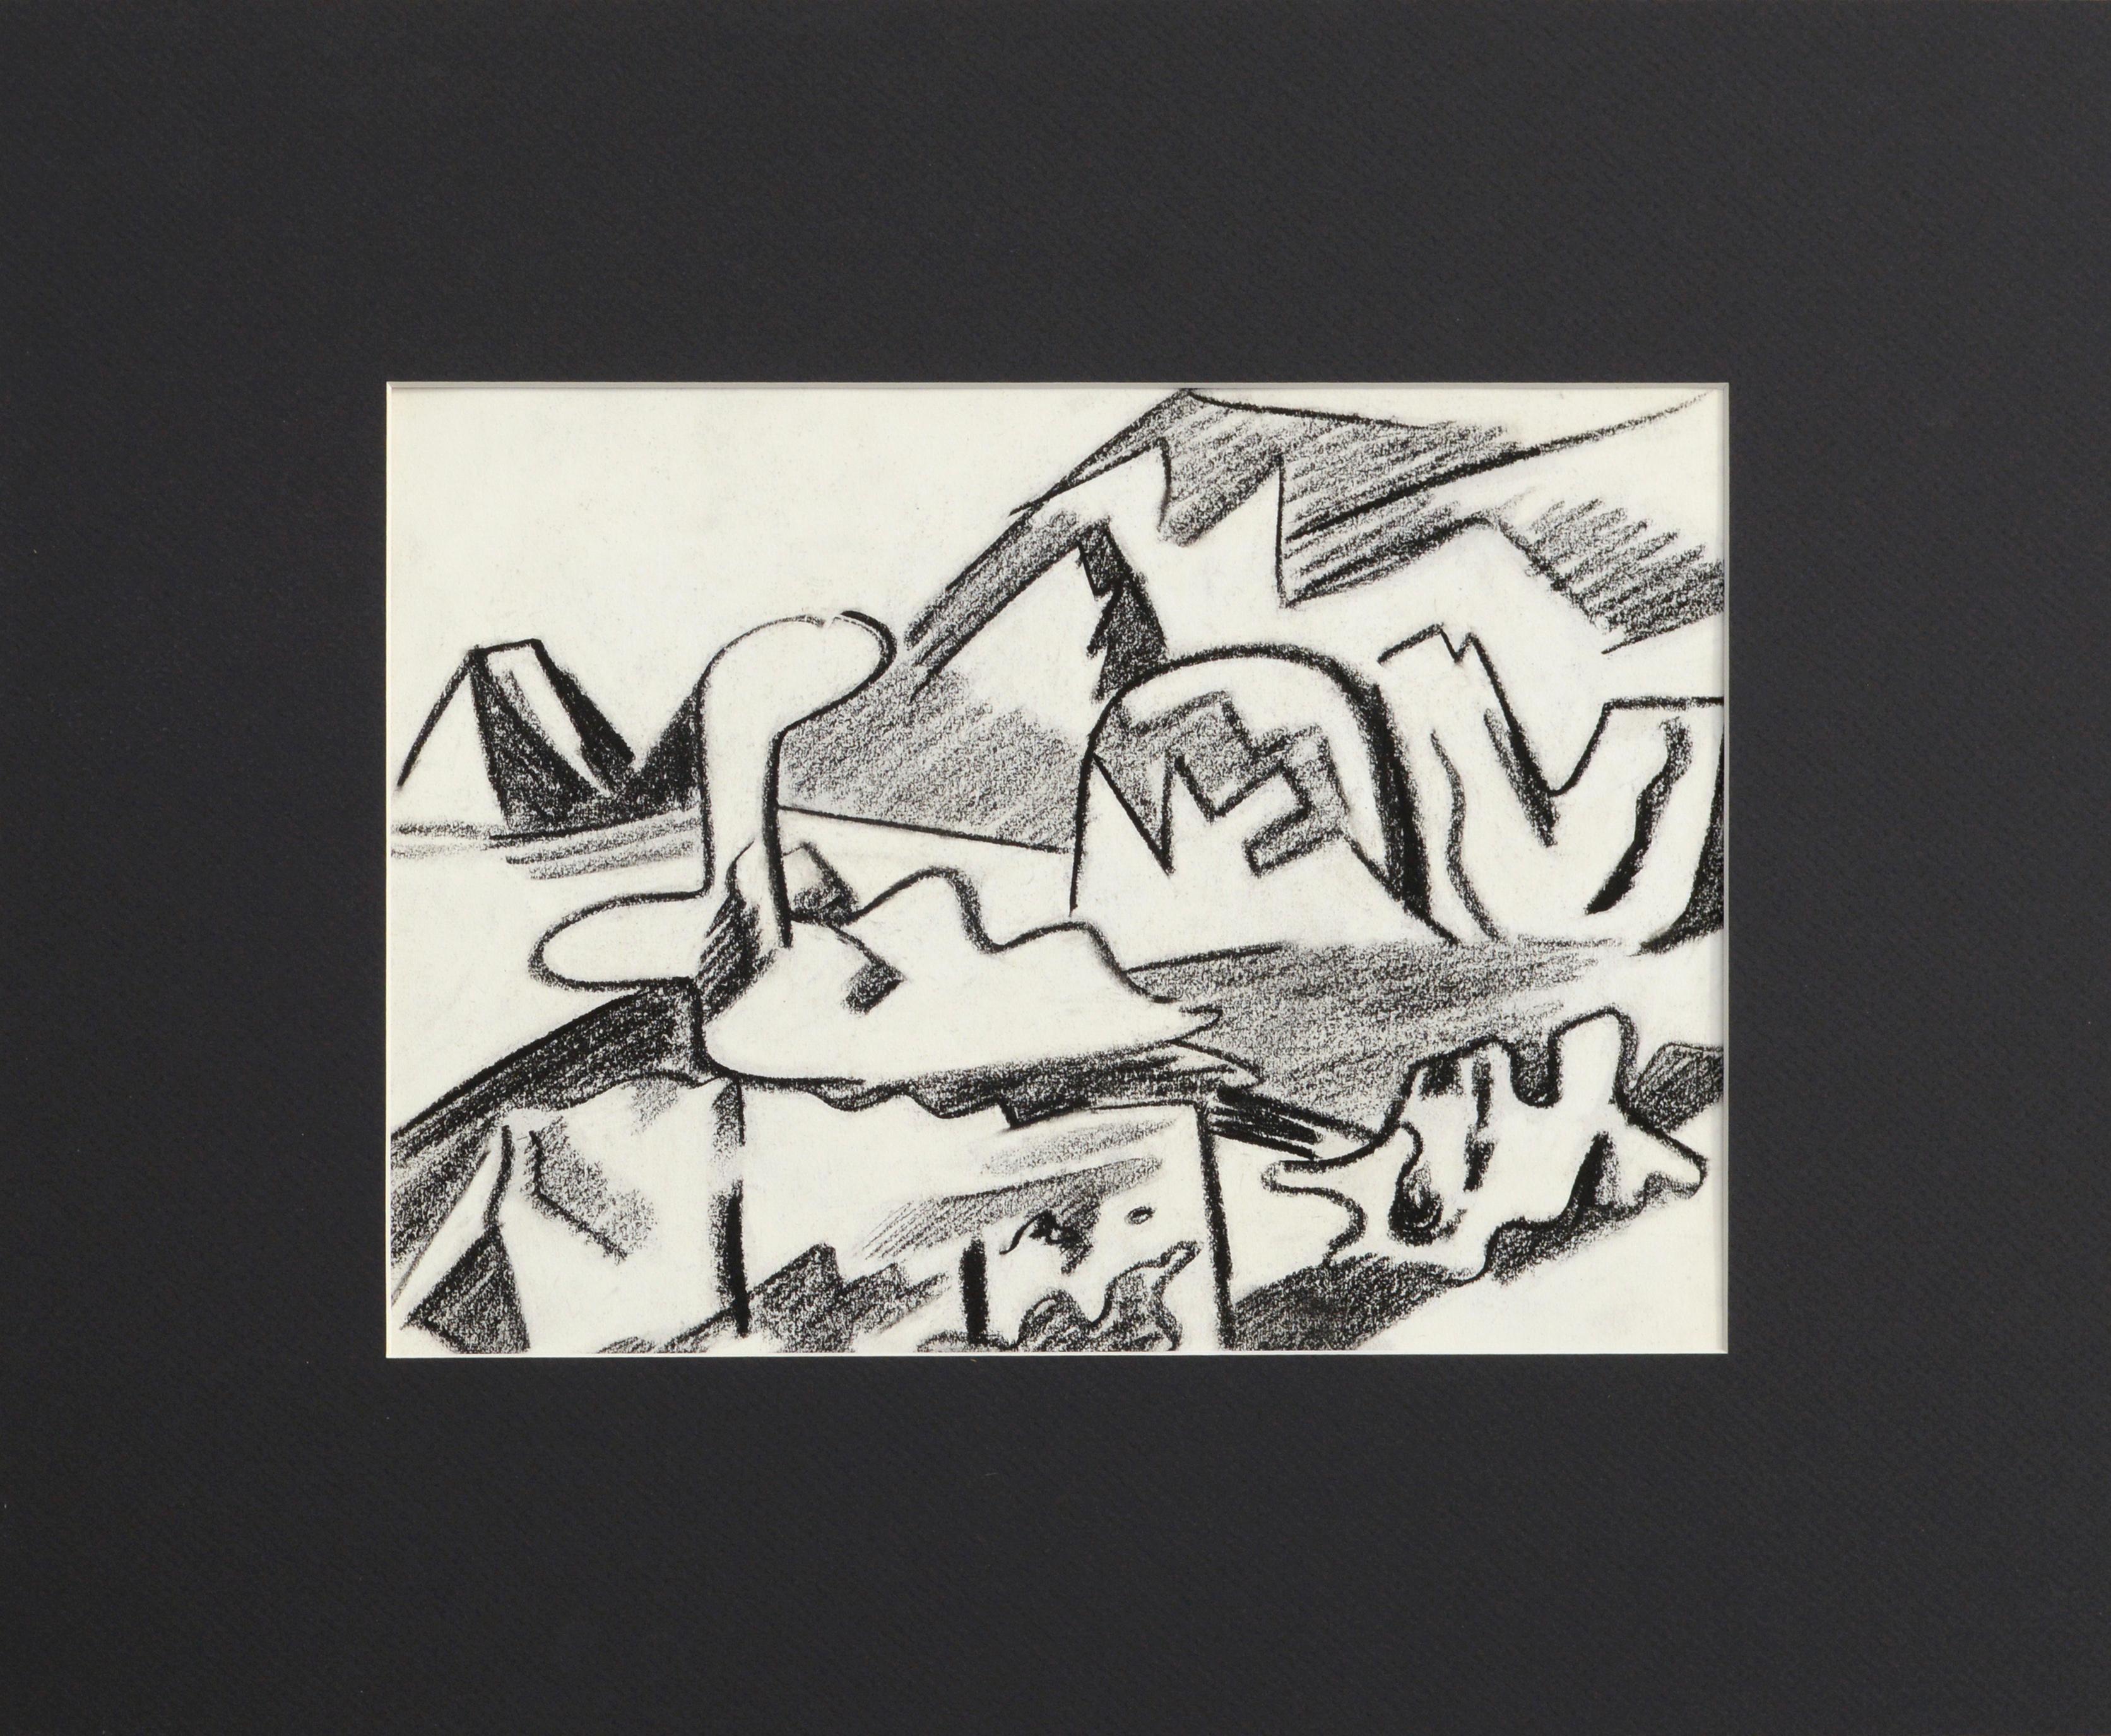 Mid Century Abstracted Bay Area Landscape, Black & White Pastel Drawing 